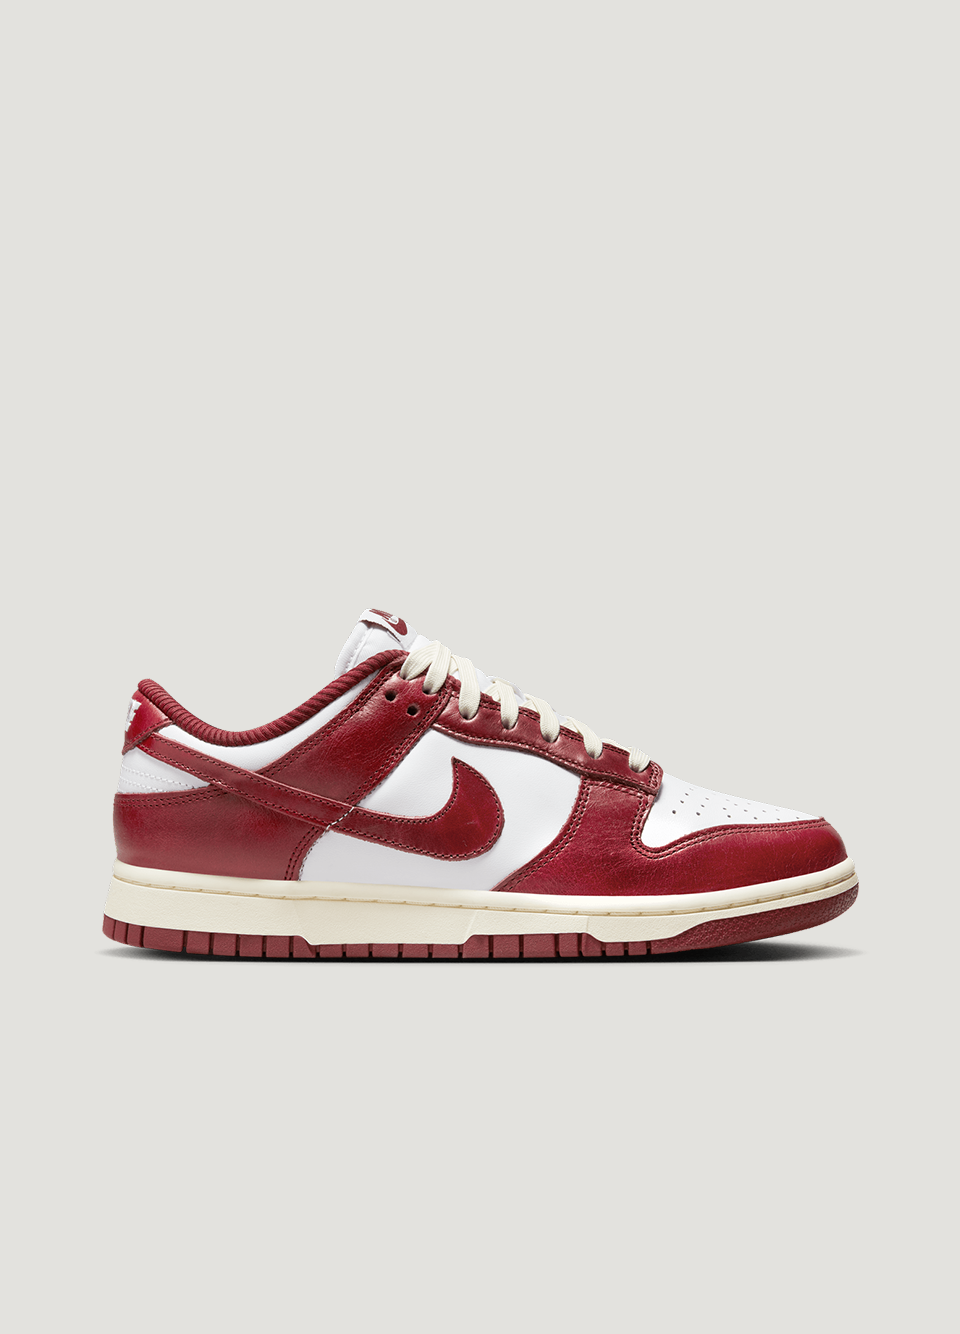 WOMEN’S NIKE DUNK LOW ‘TEAM RED’